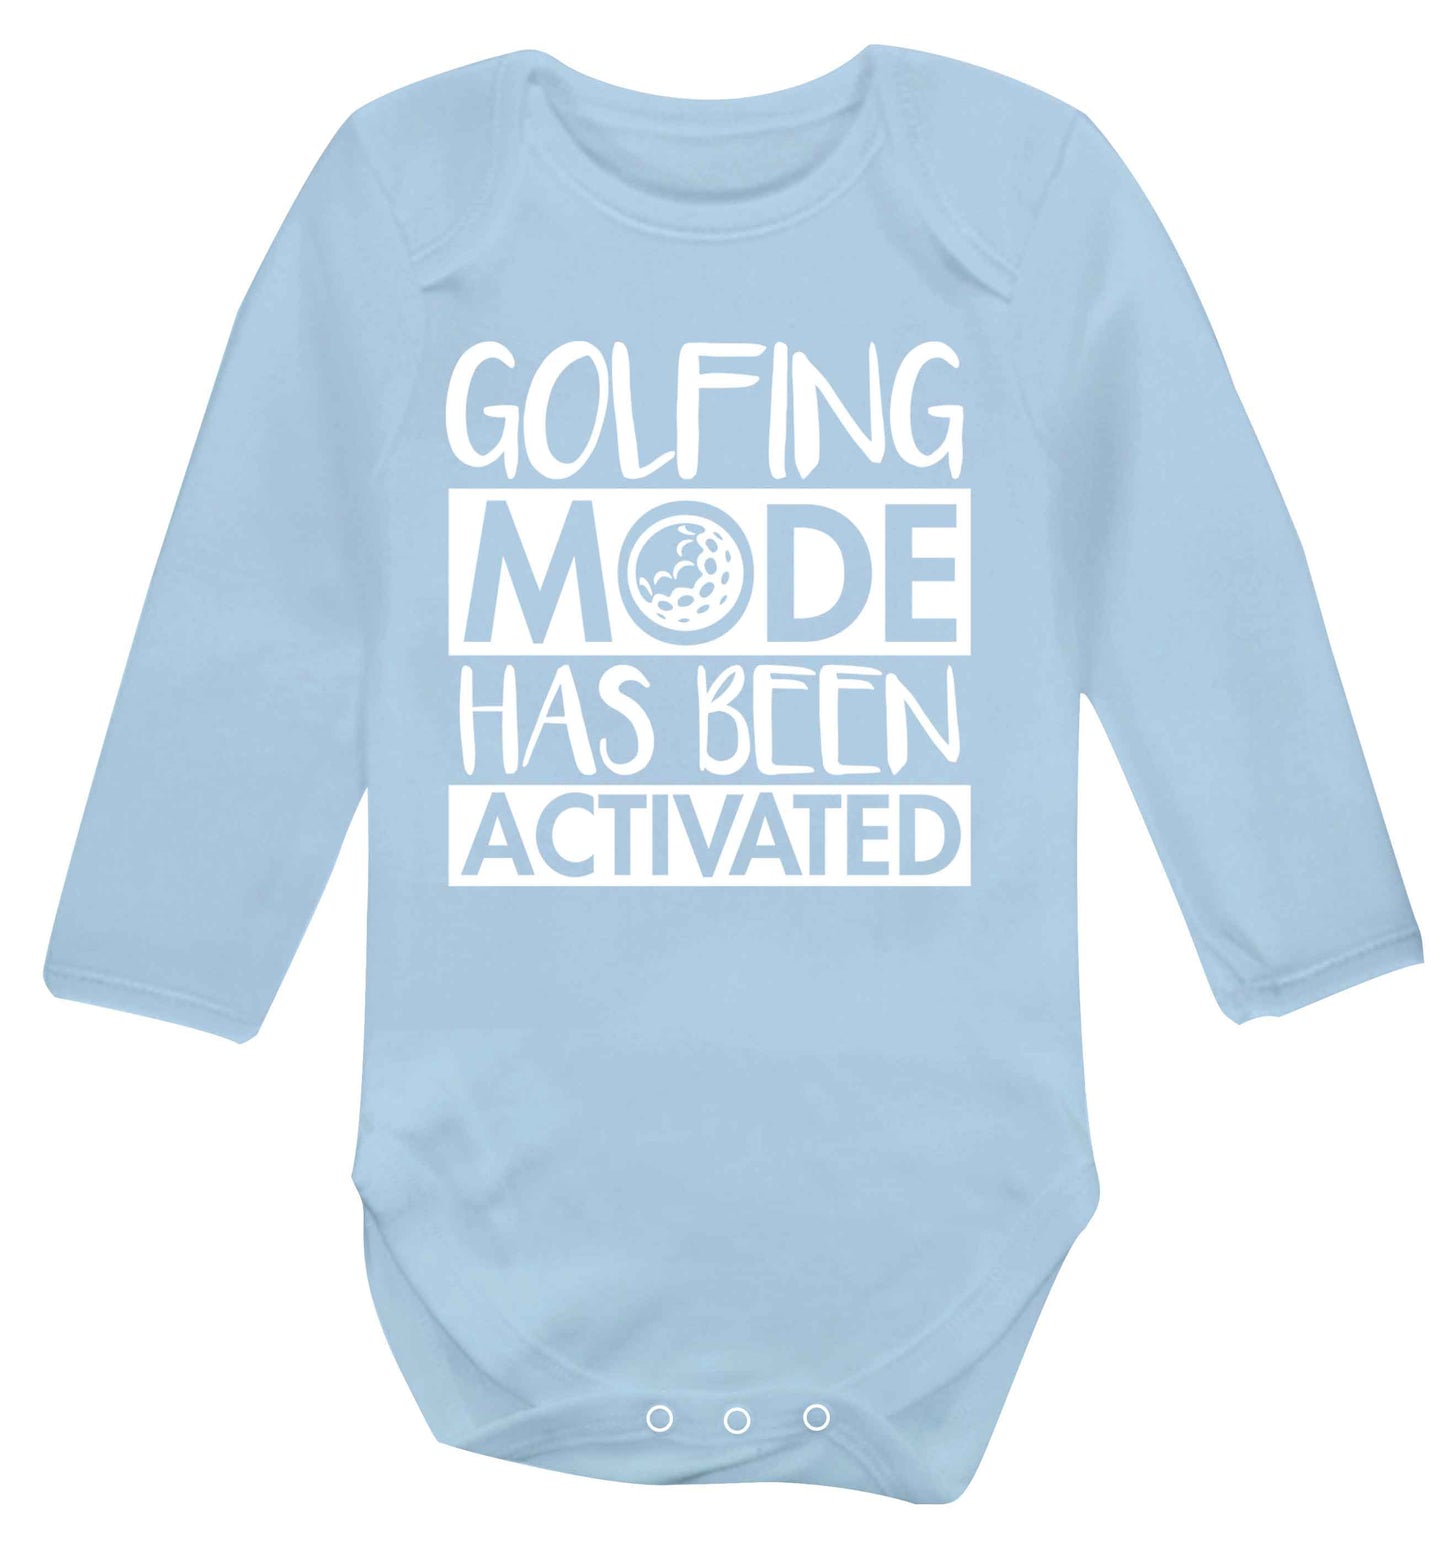 Golfing mode has been activated Baby Vest long sleeved pale blue 6-12 months